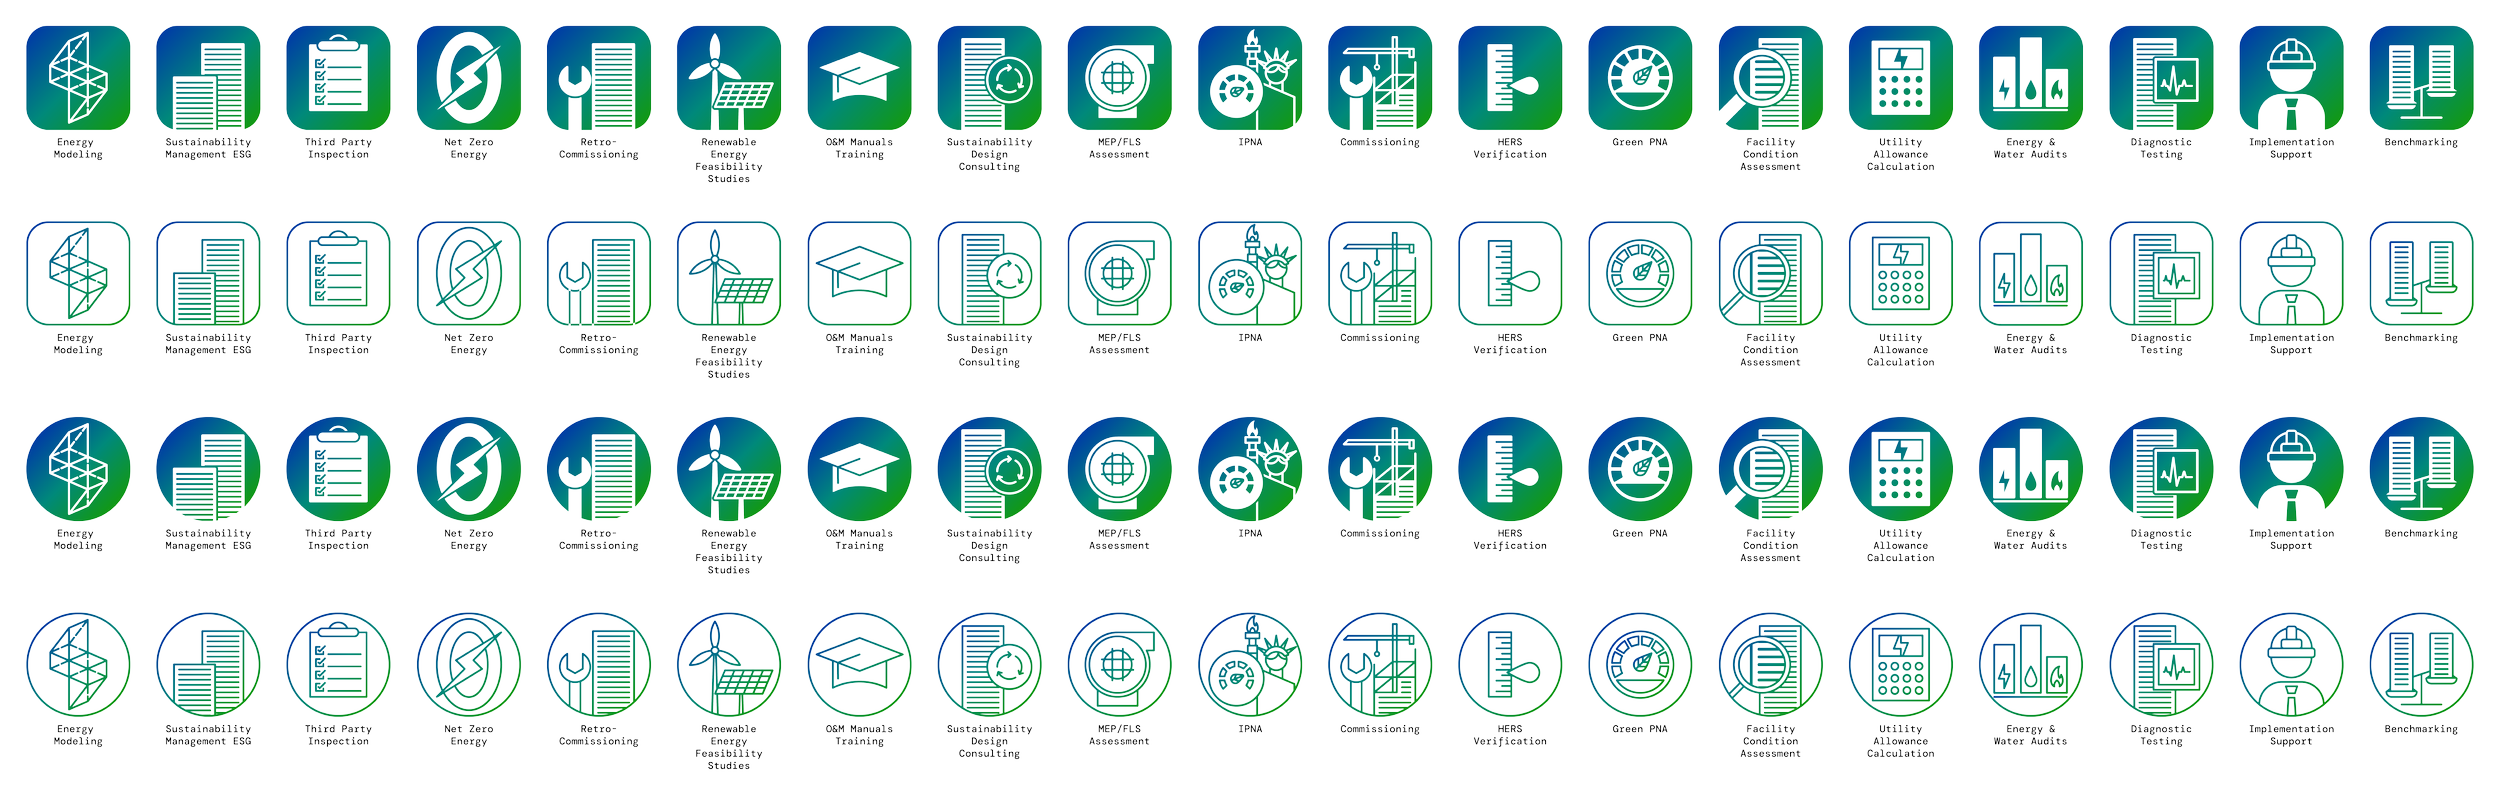 PTE Icons - Arranged-06.png